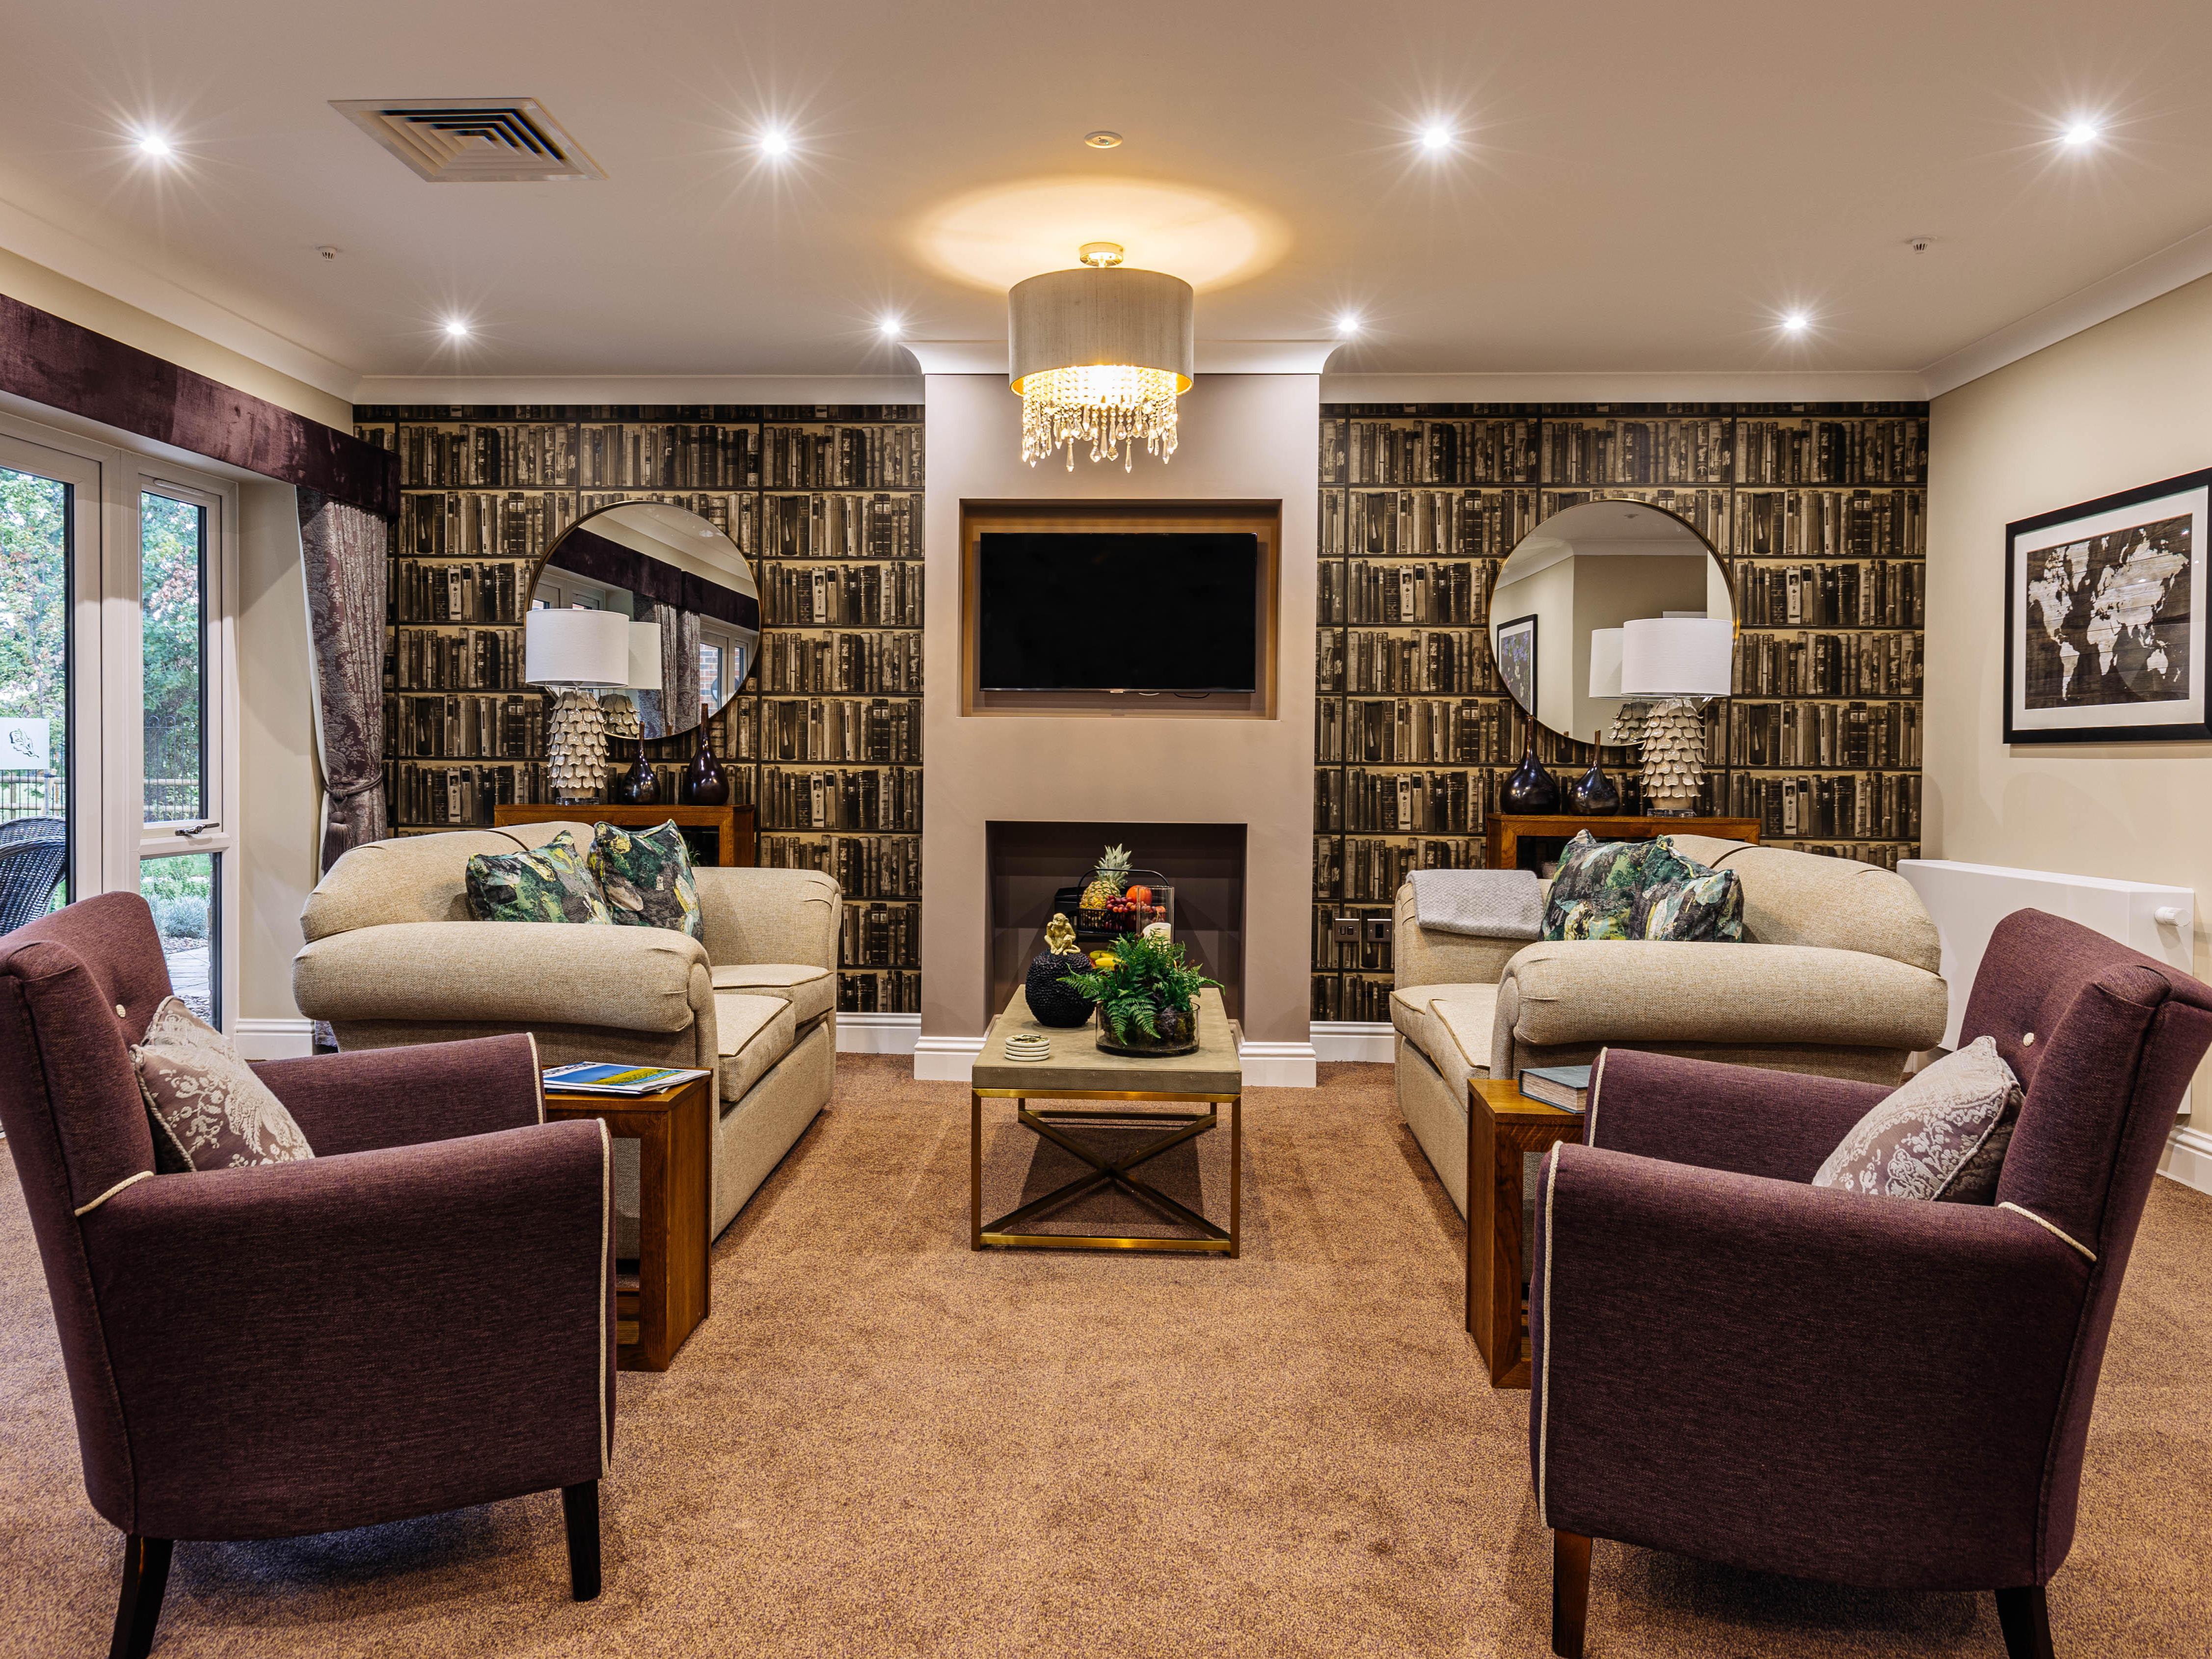 Images Barchester - Parley Place Care Home